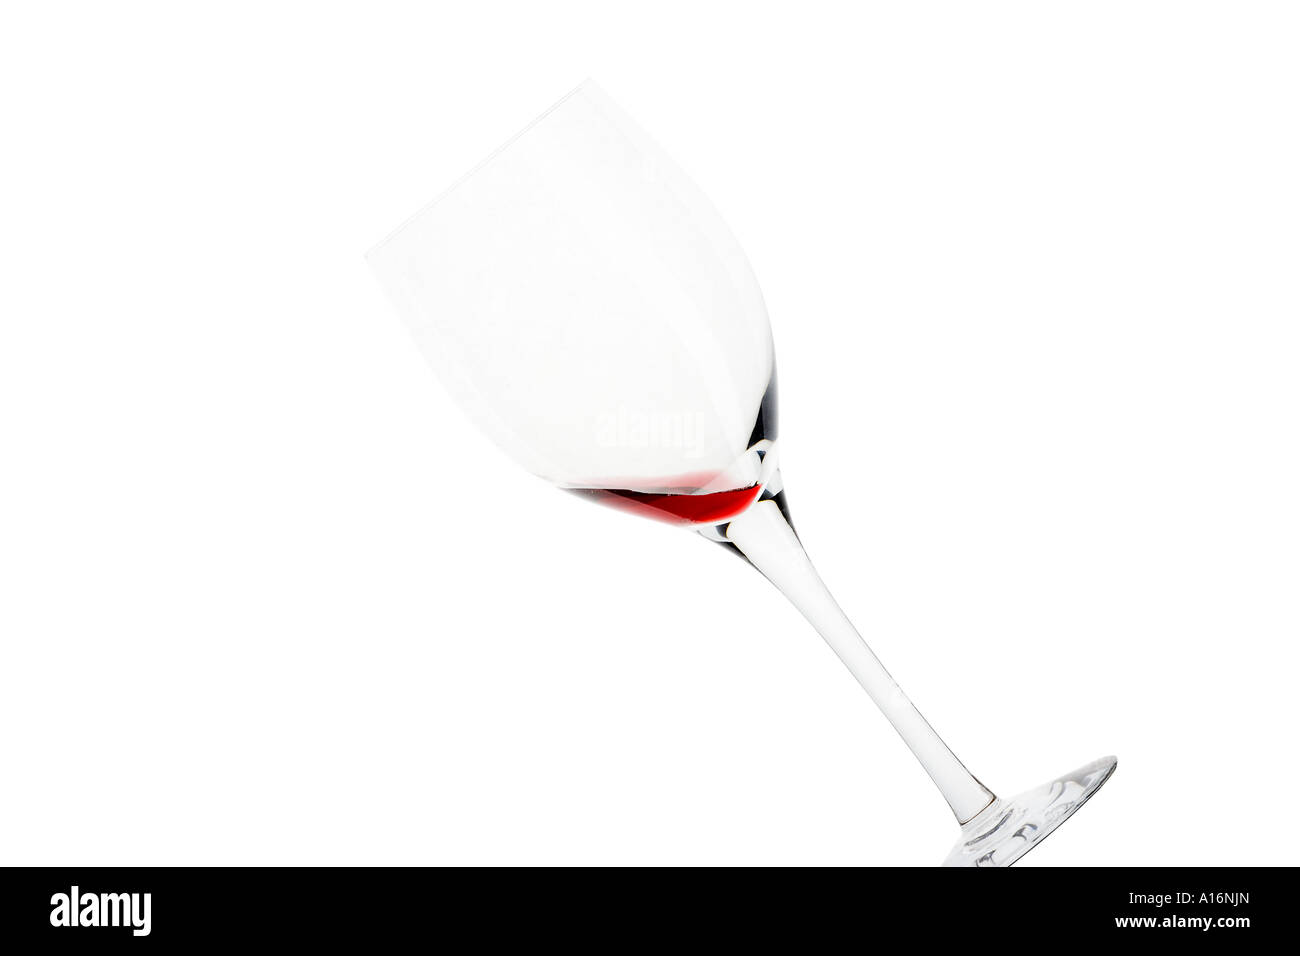 1,137 Wine Glass Tilted Images, Stock Photos, 3D objects, & Vectors